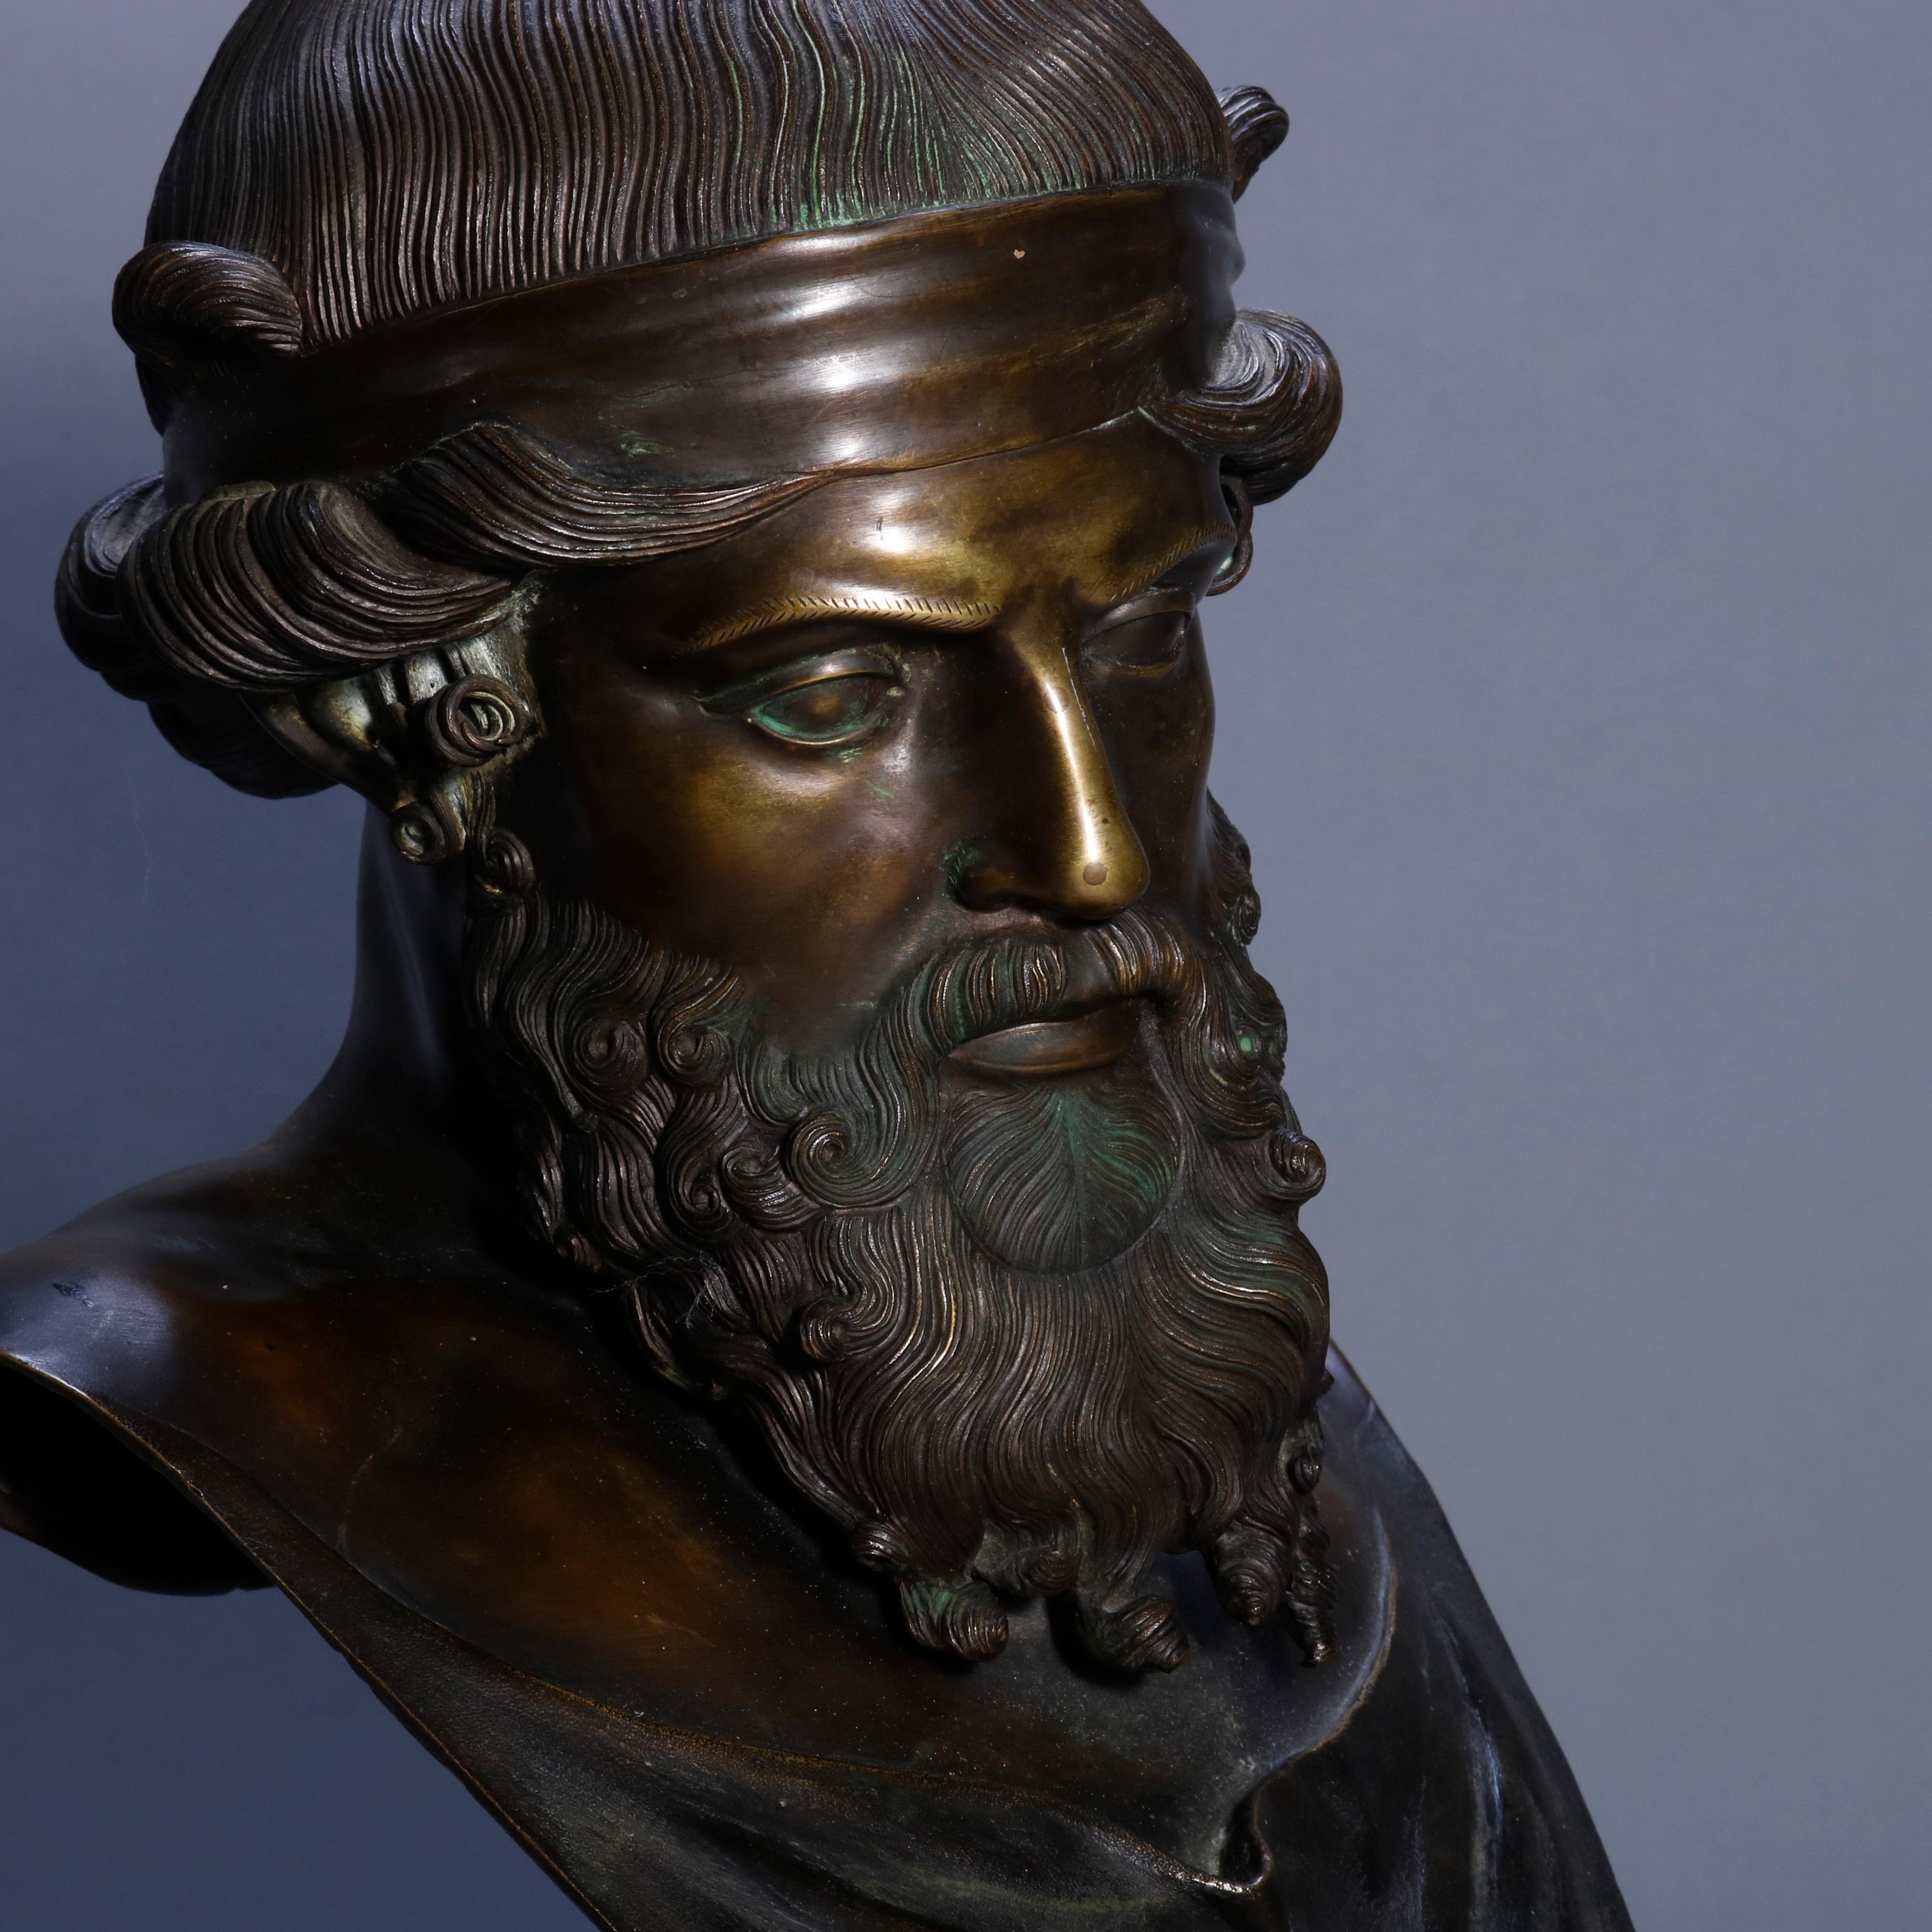 An antique Italian cast bronze portrait bust sculpture of Plato or more likely Dionysus (as portrayed in the first iconography of the god) after original displayed in the Naples Museum of Archaeology, mounted on ebonized wood plinth, circa